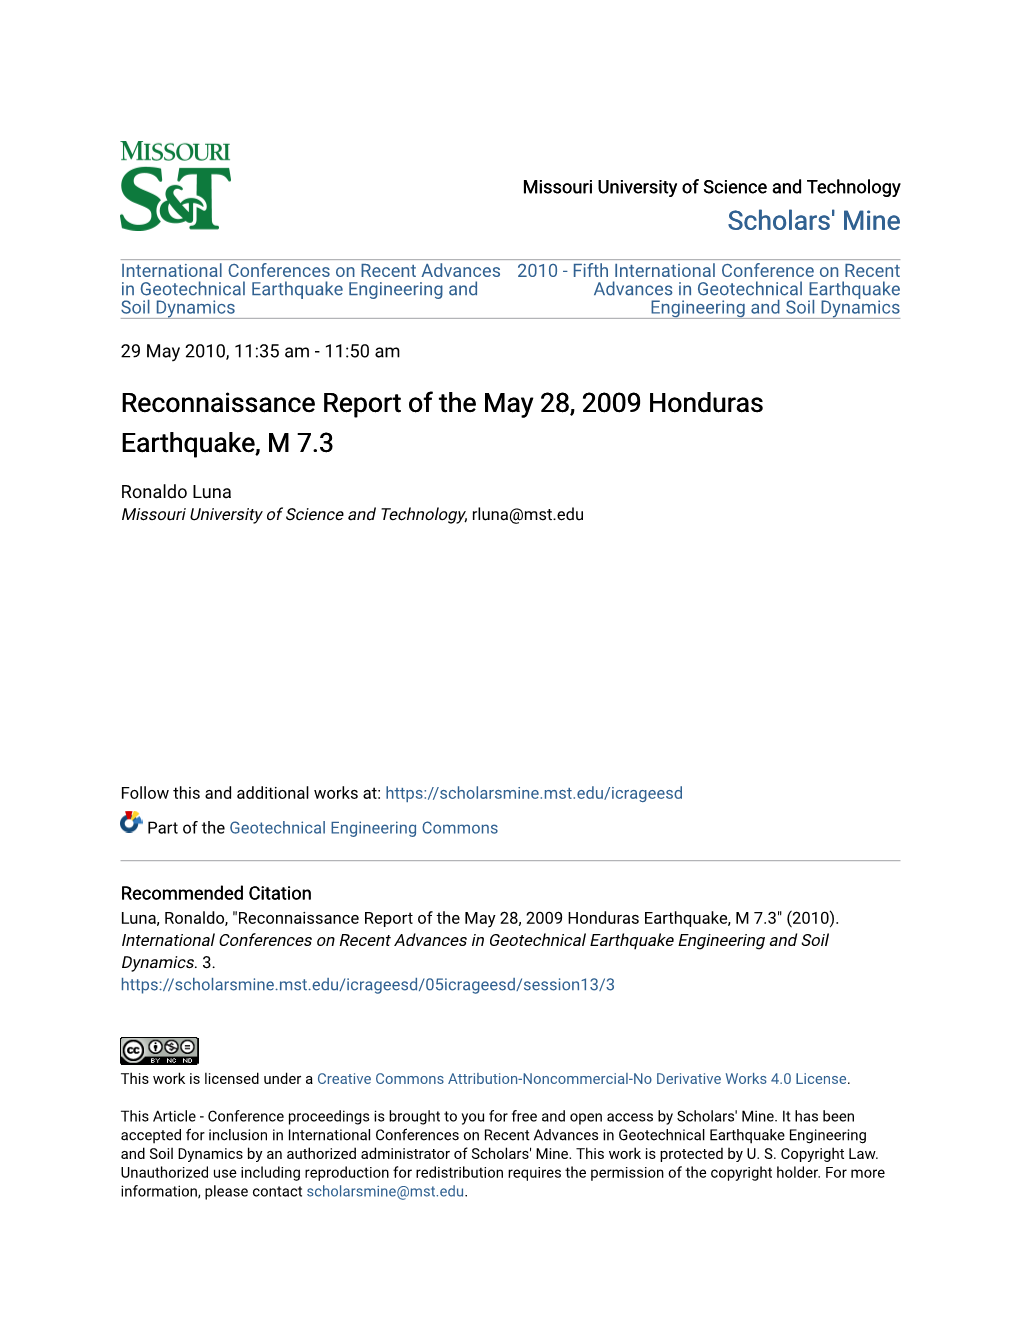 Reconnaissance Report of the May 28, 2009 Honduras Earthquake, M 7.3